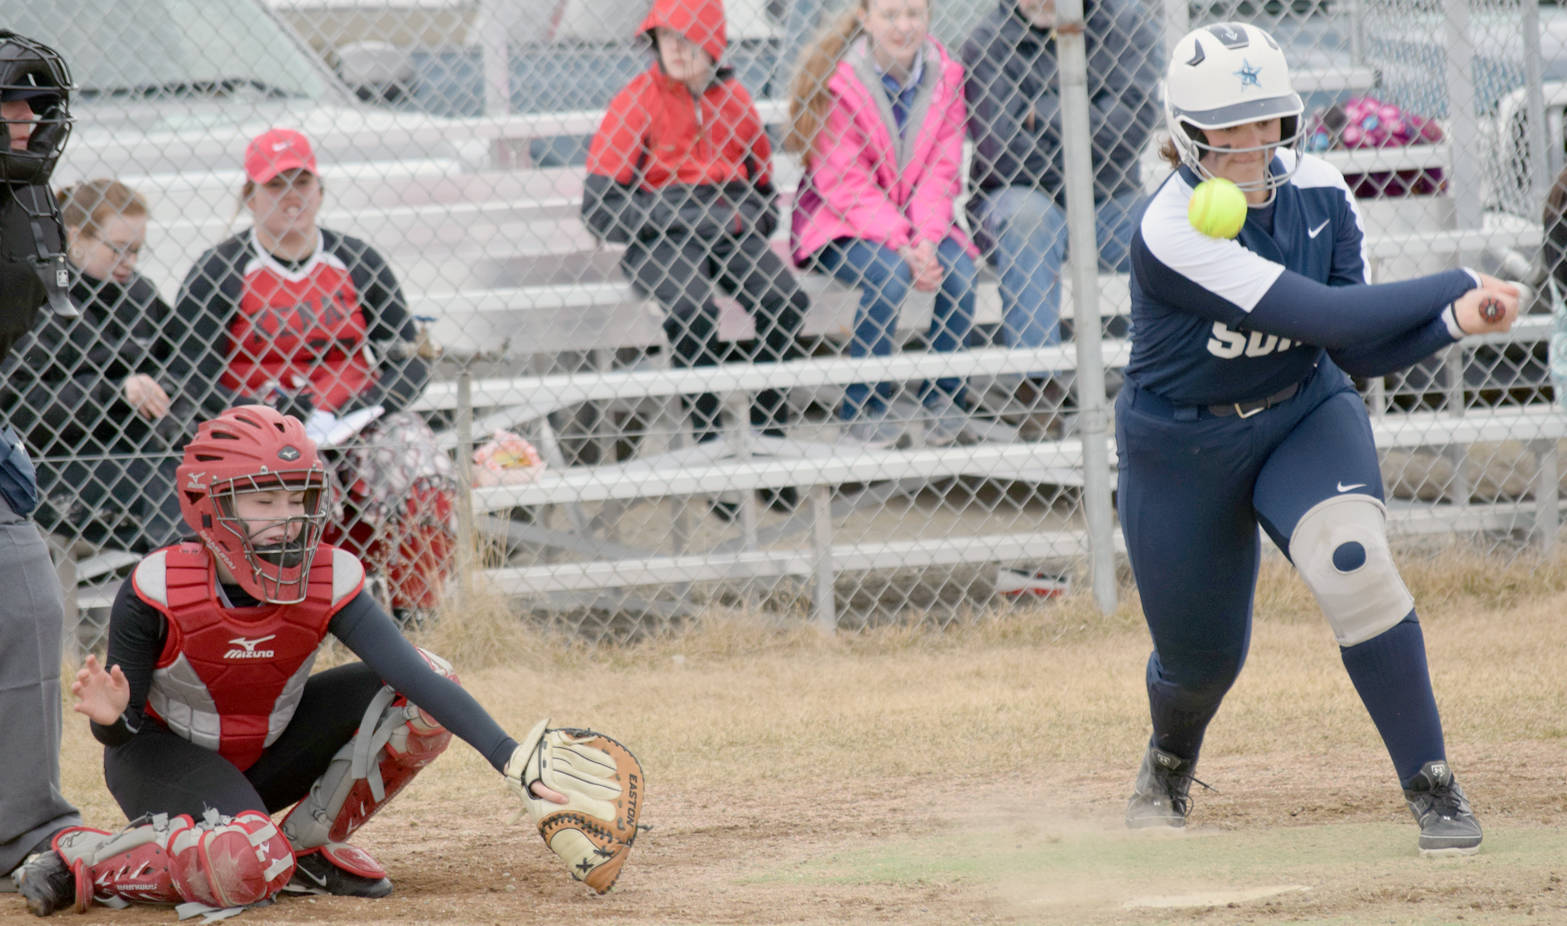 Soldotna’s Bailey Smith pounds the ball into the ground Thursday, May 3, 2018, at Steve Shearer Memorial Ball Park in Kenai. Kenai Central catcher Alyssa Stanton would pop up and toss Smith out at first base. (Photo by Jeff Helminiak/Peninsula Clarion)